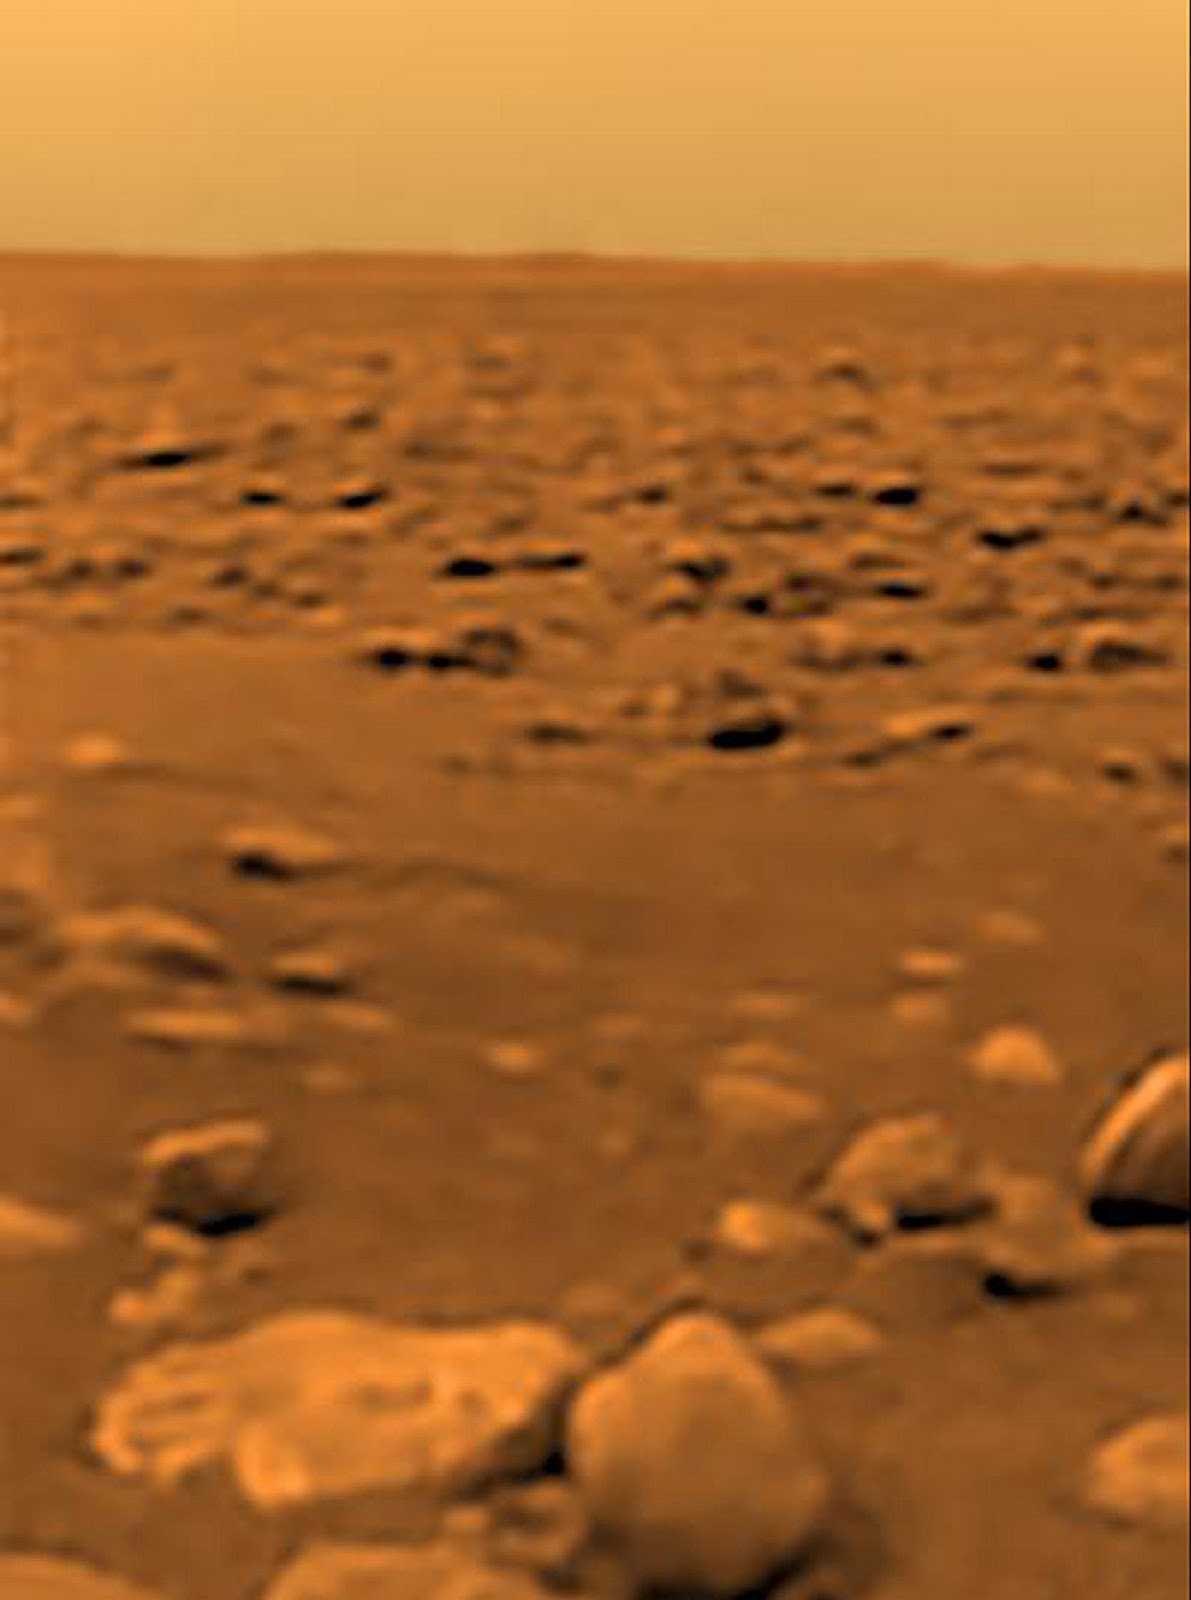 The surface of Titan, a moon of Saturn, showing rocks on flat ground.